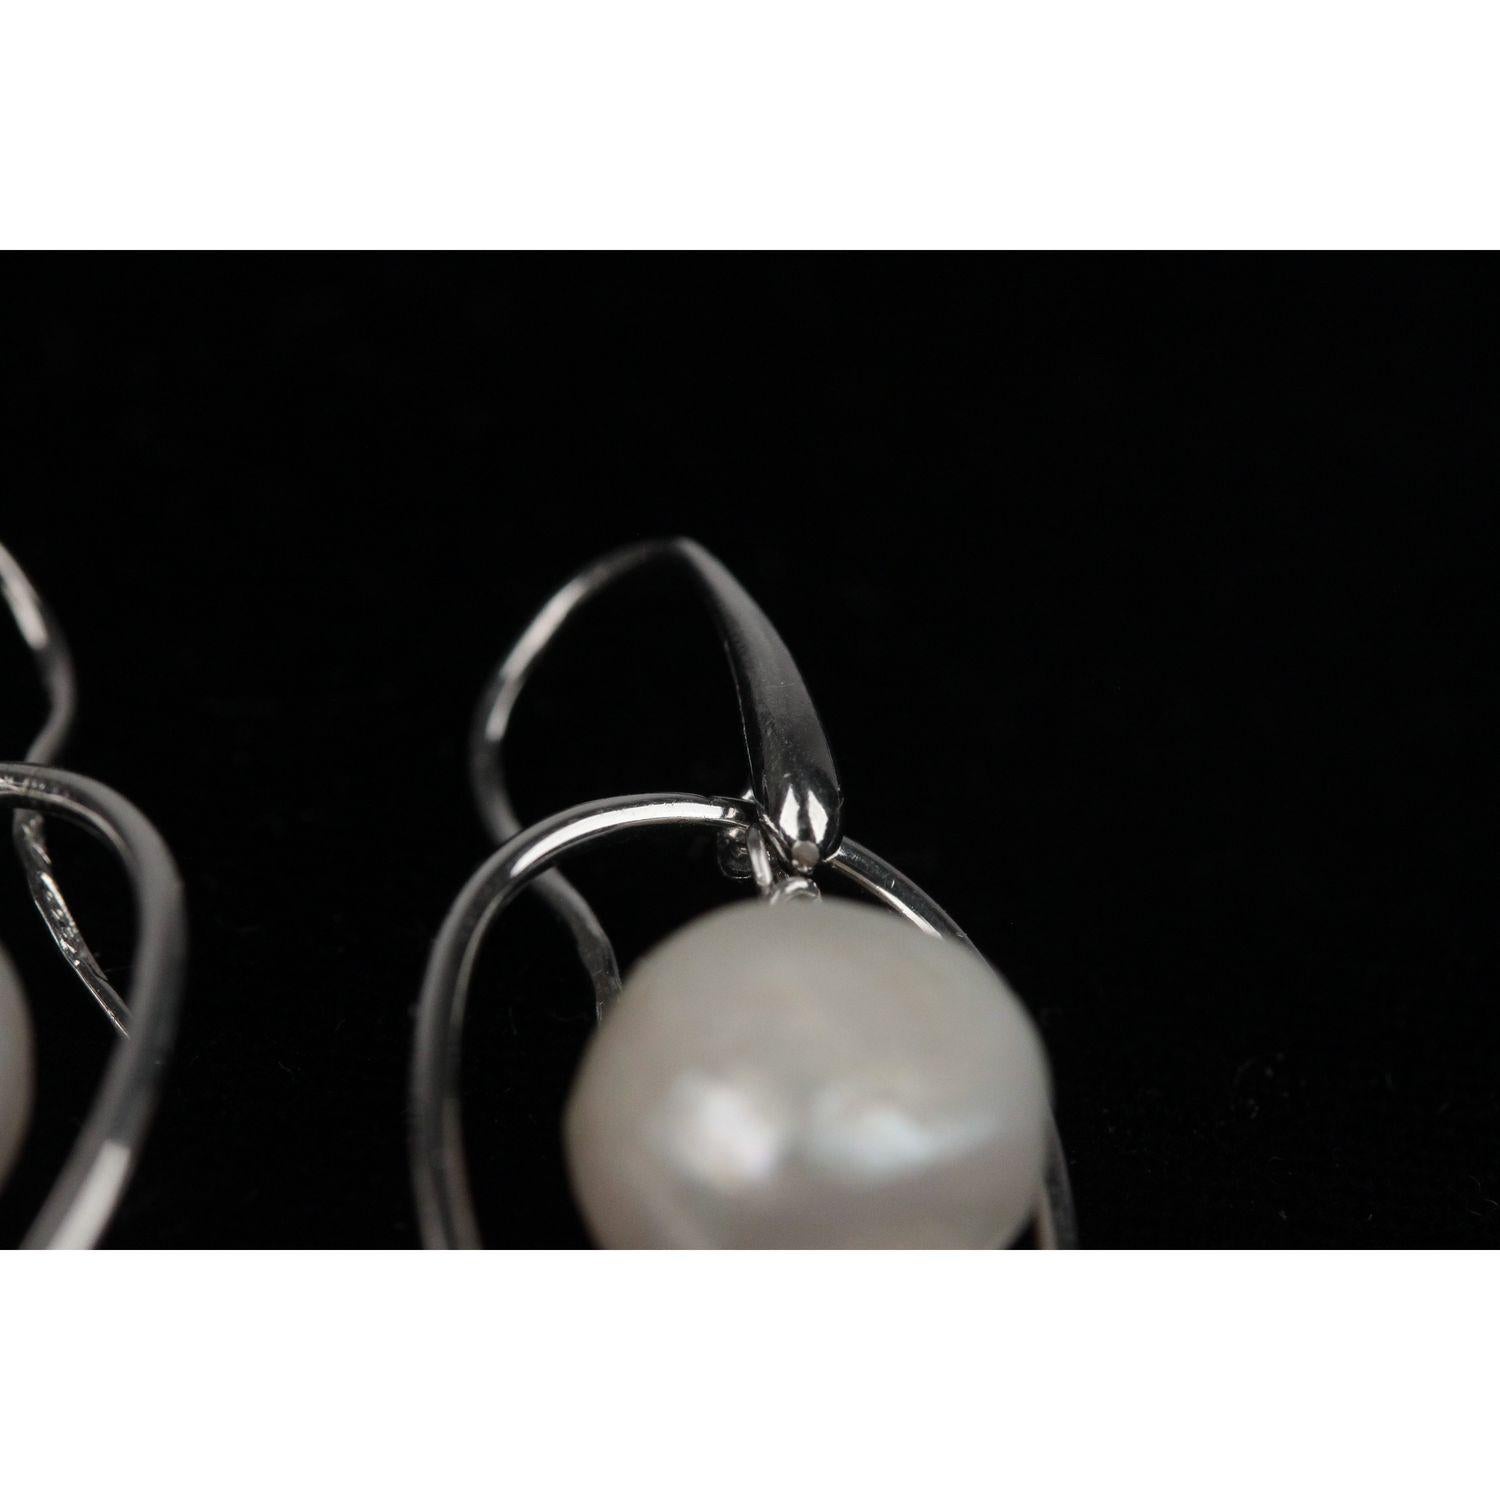 Women's Handmade in Italy 925 Sterling Silver Earrings with Baroque Pearls Beads